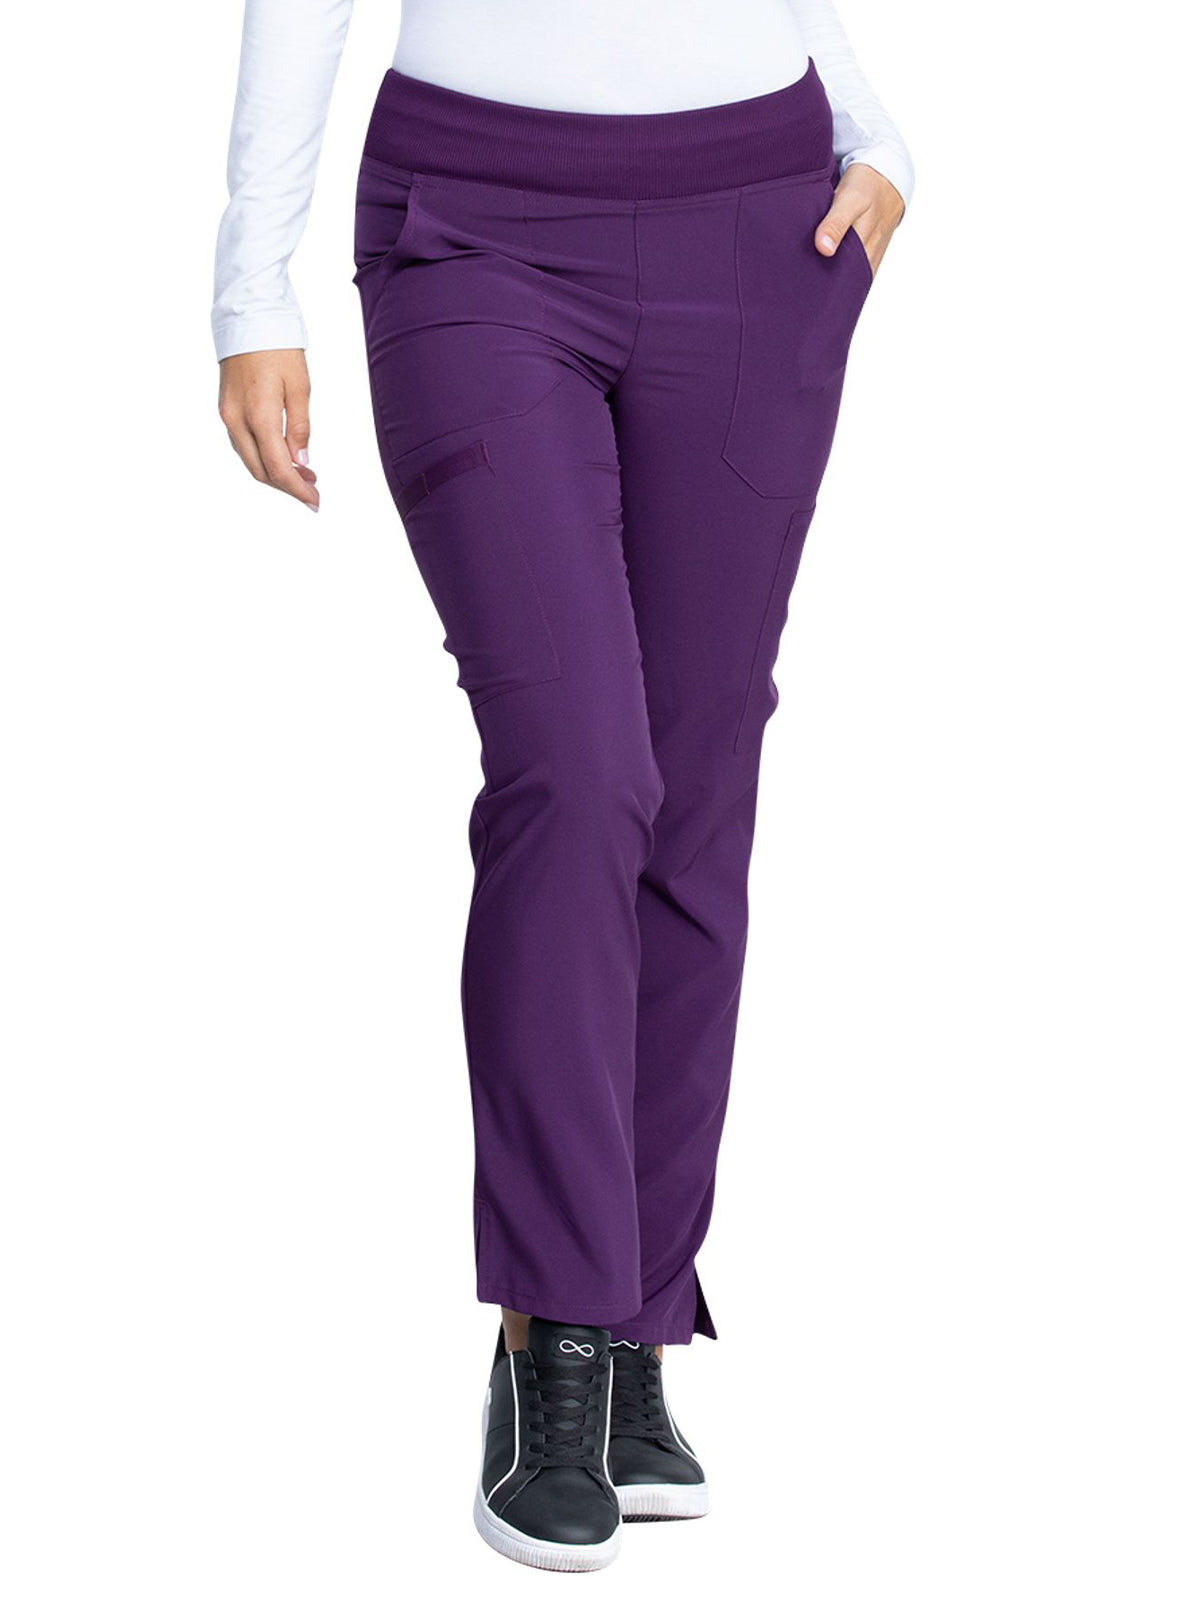 Women's Natural Rise Tapered Leg Pull-On Pant - DK005 - Eggplant